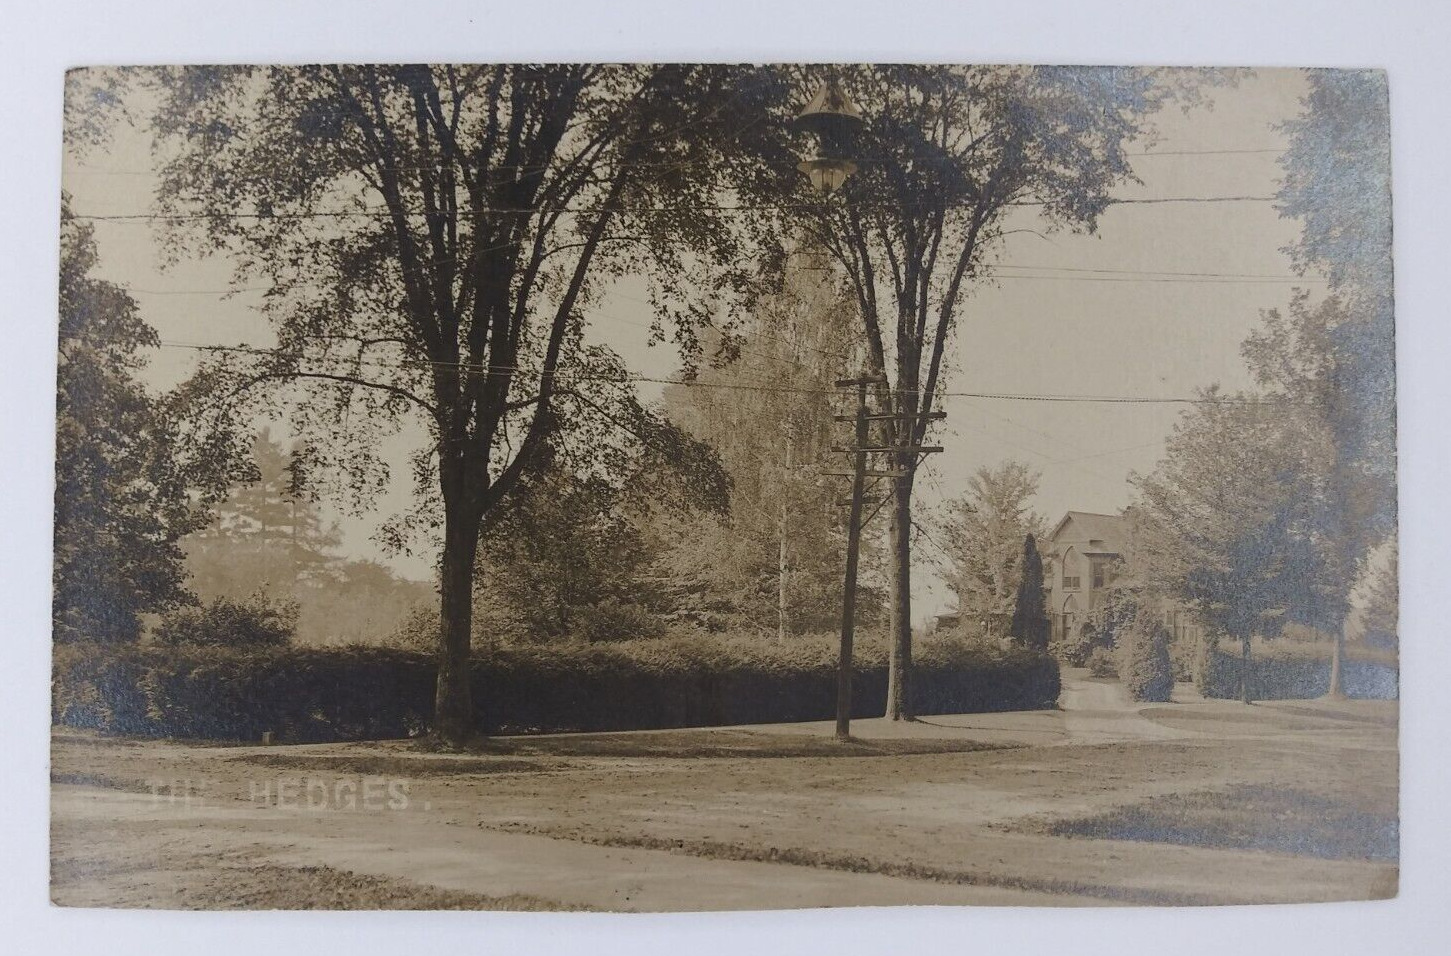 The Hedges Amherst, Mass. Antique/Vintage Real Photo Postcard Velox Unposted